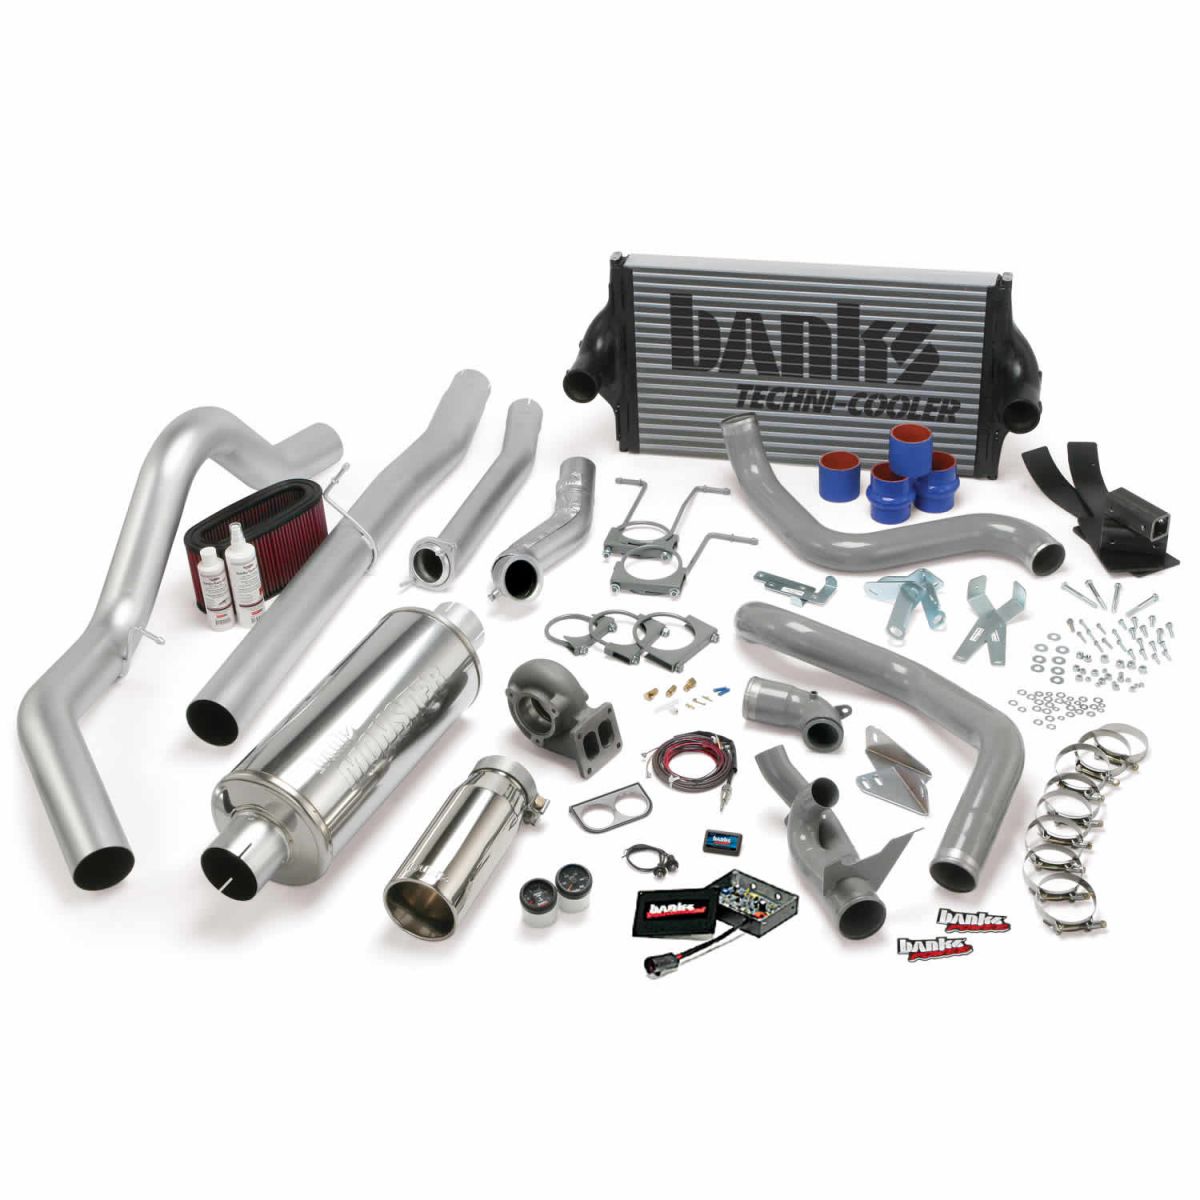 Banks Power - Banks Power PowerPack Bundle Complete Power System W/OttoMind Engine Calibration Module Chrome Tail Pipe 94-97 Ford 7.3L CCLB Automatic Transmission